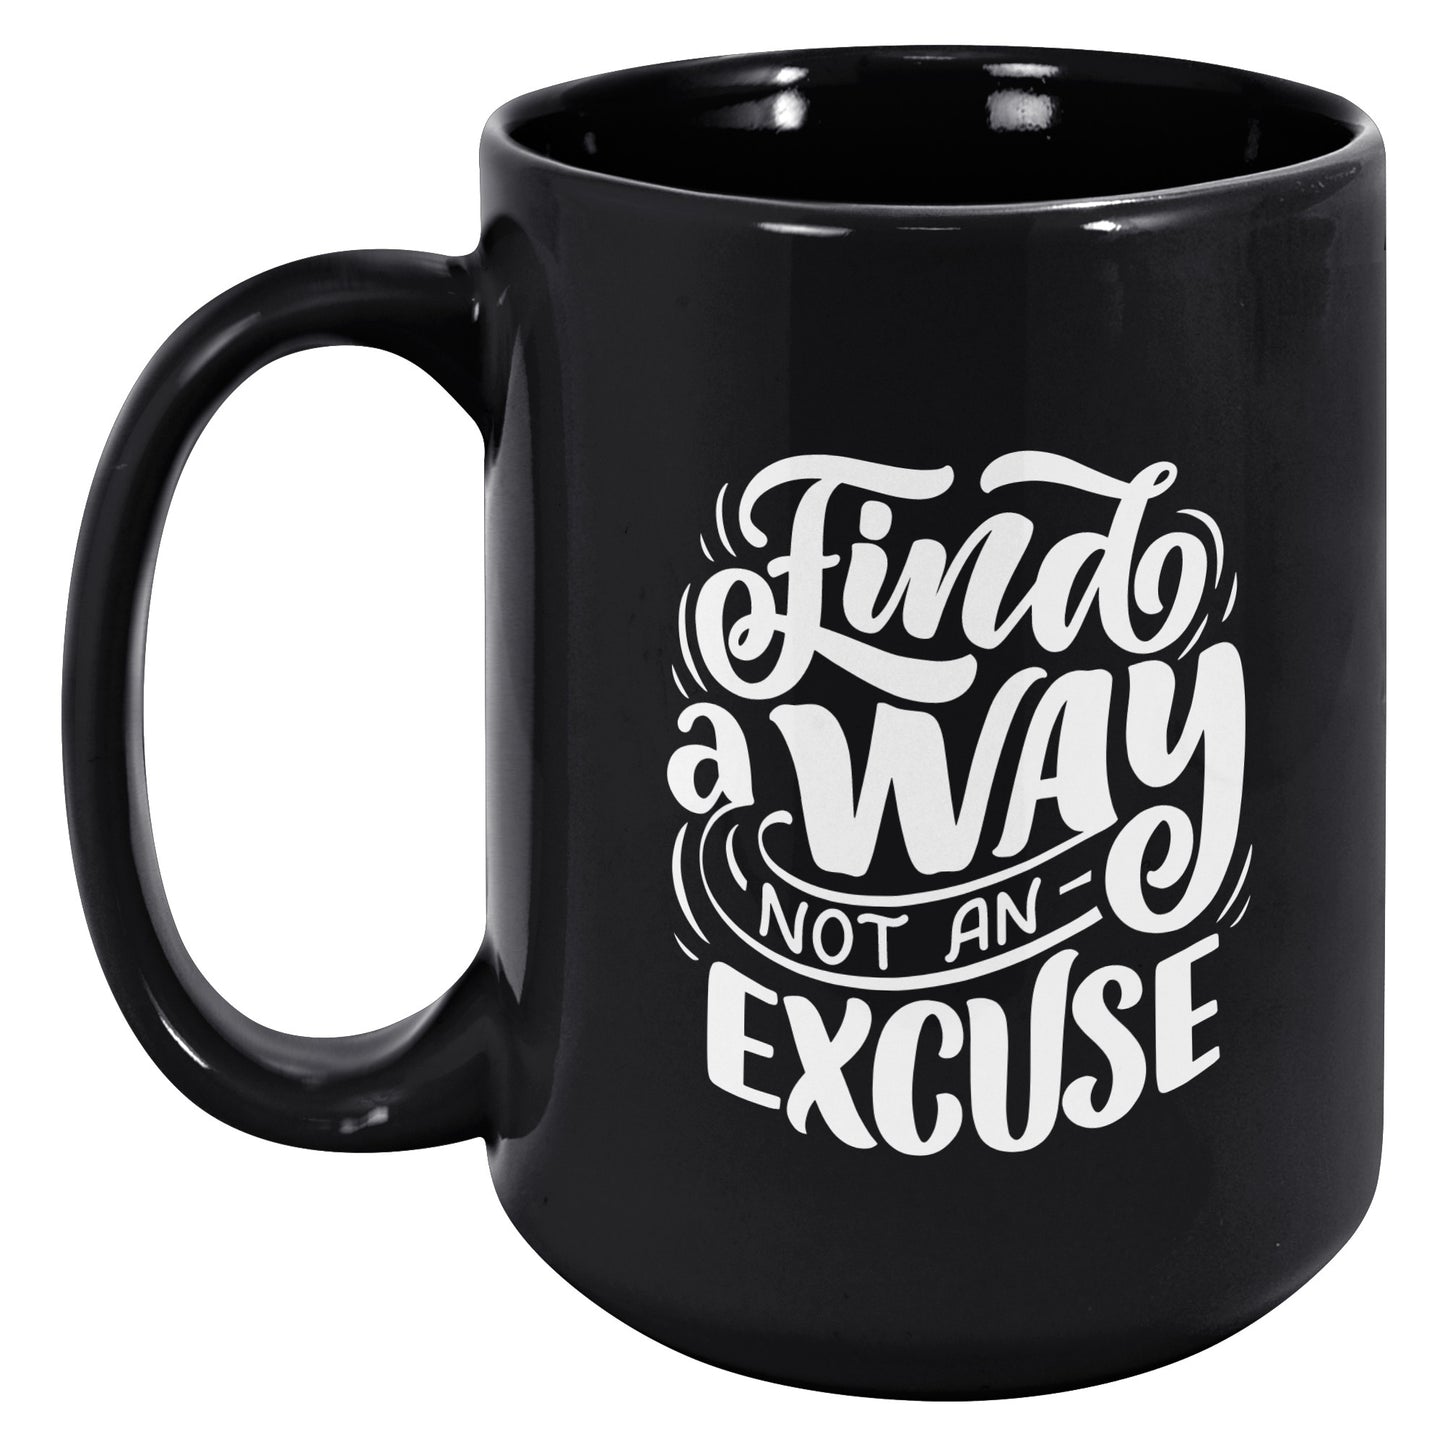 Motivational mug for the one who needs a little push with their tea